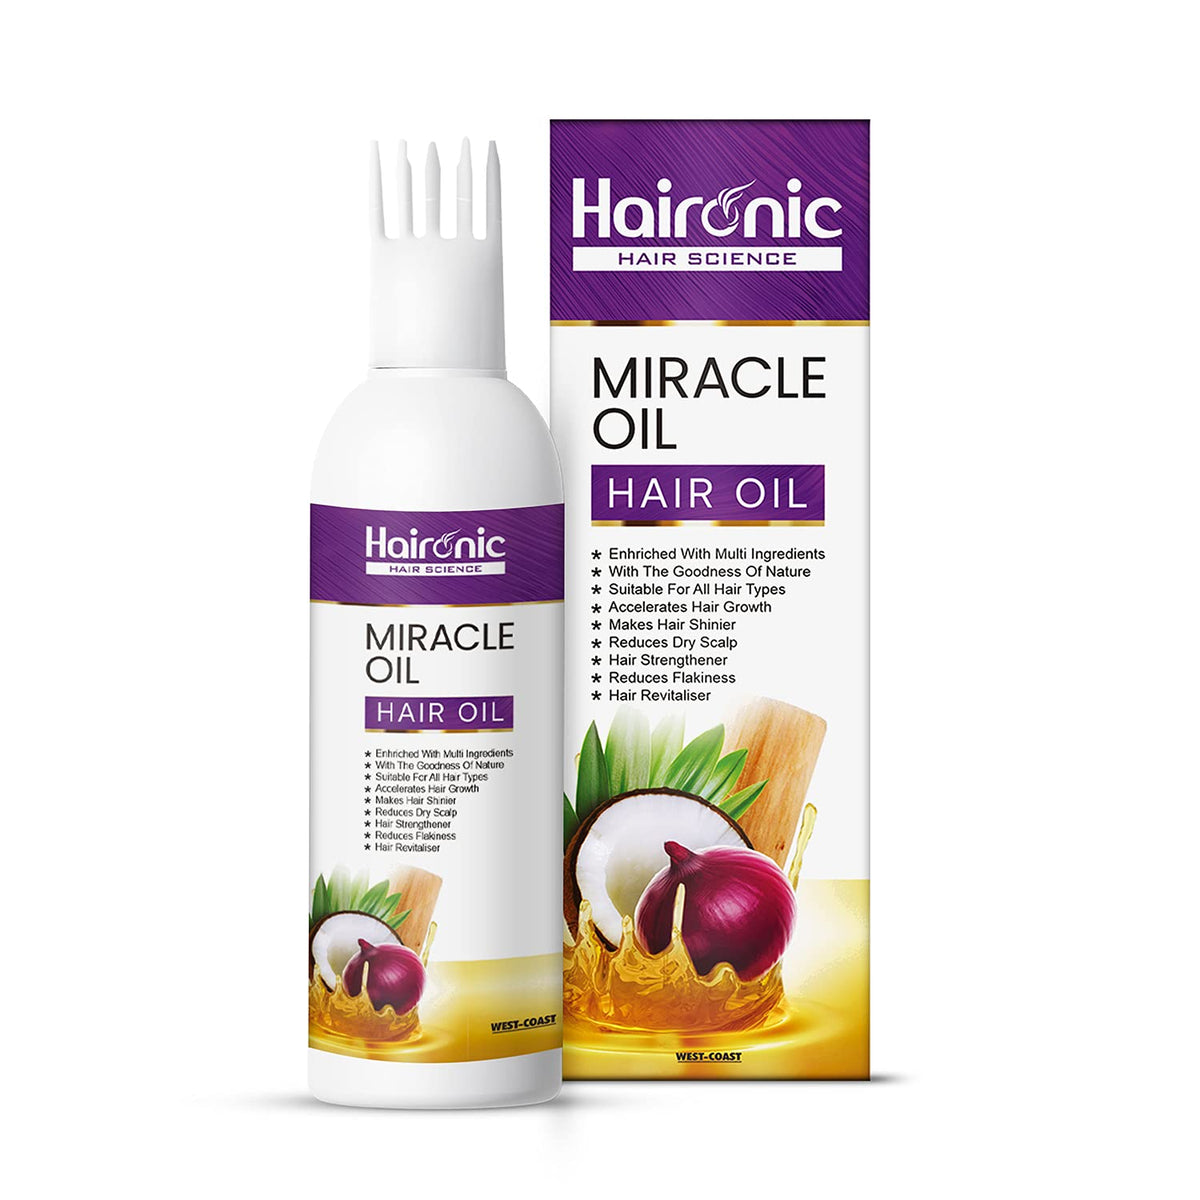 Haironic Hair Science Miracle Hair Oil Enriched With Multi Ingredients for Anti-Hair Fall Control with Organic Onion and Sesame Seeds Oil -100ml